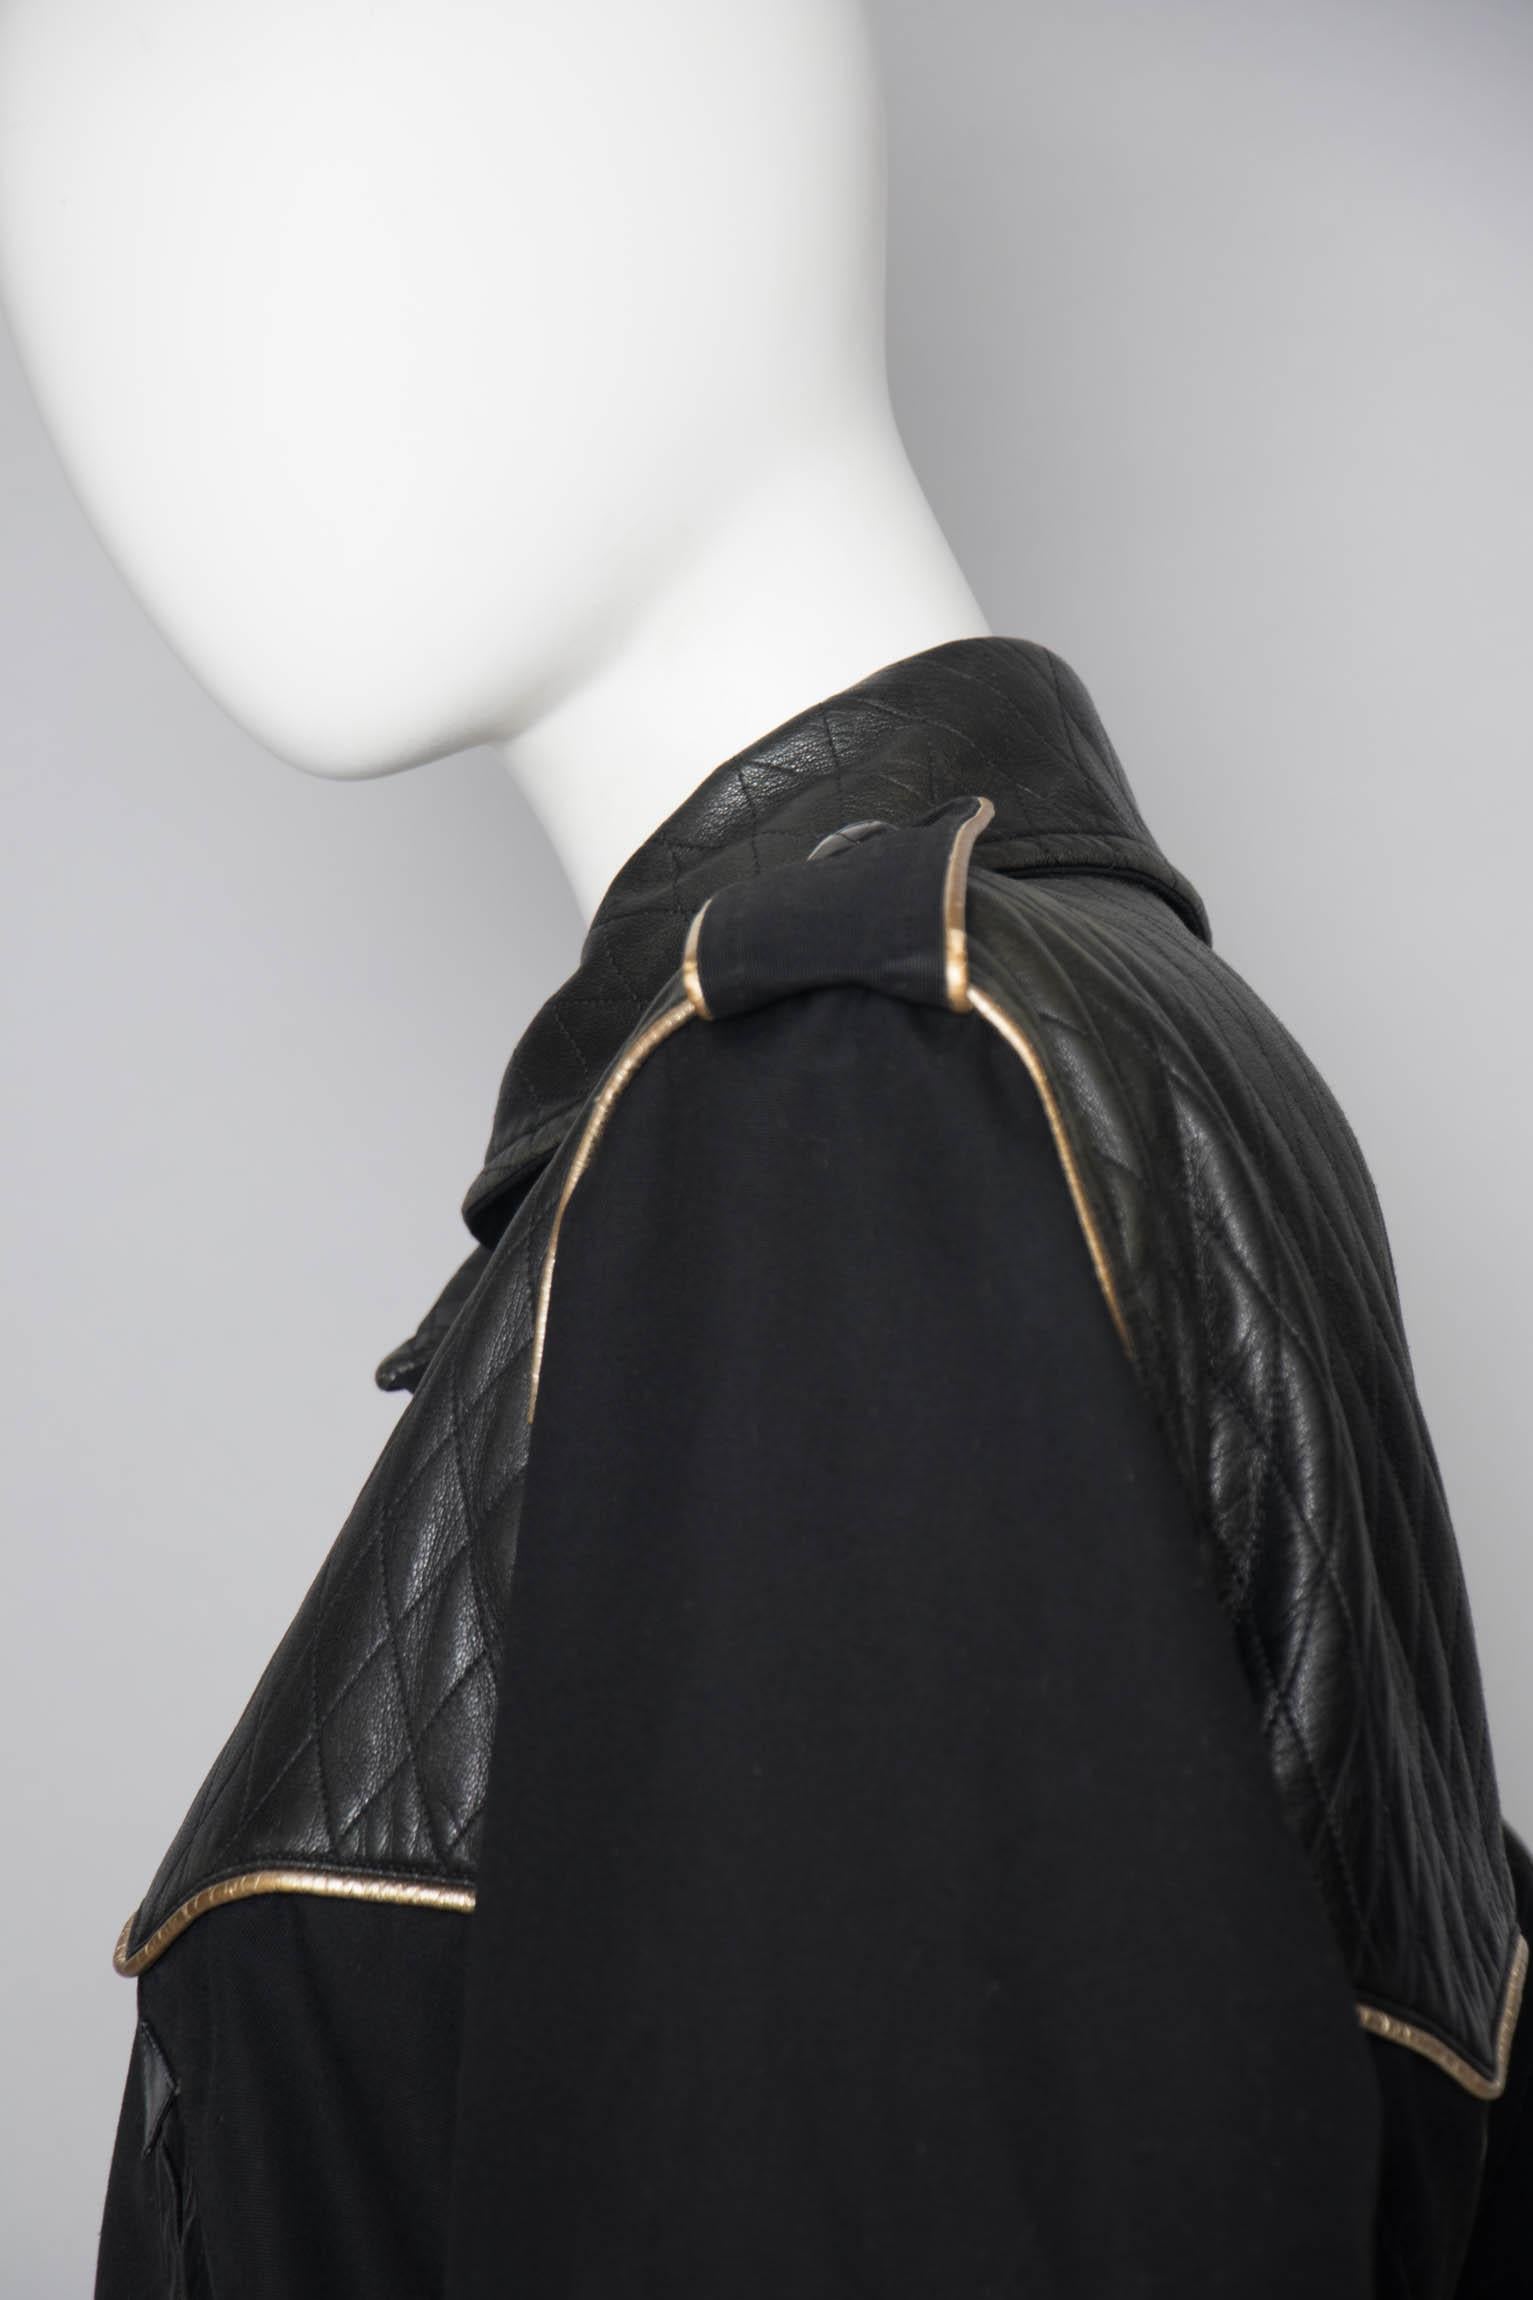 Yves Saint Laurent Rive Gauche Jacket with Leather and Gold Trim, 1980s 1